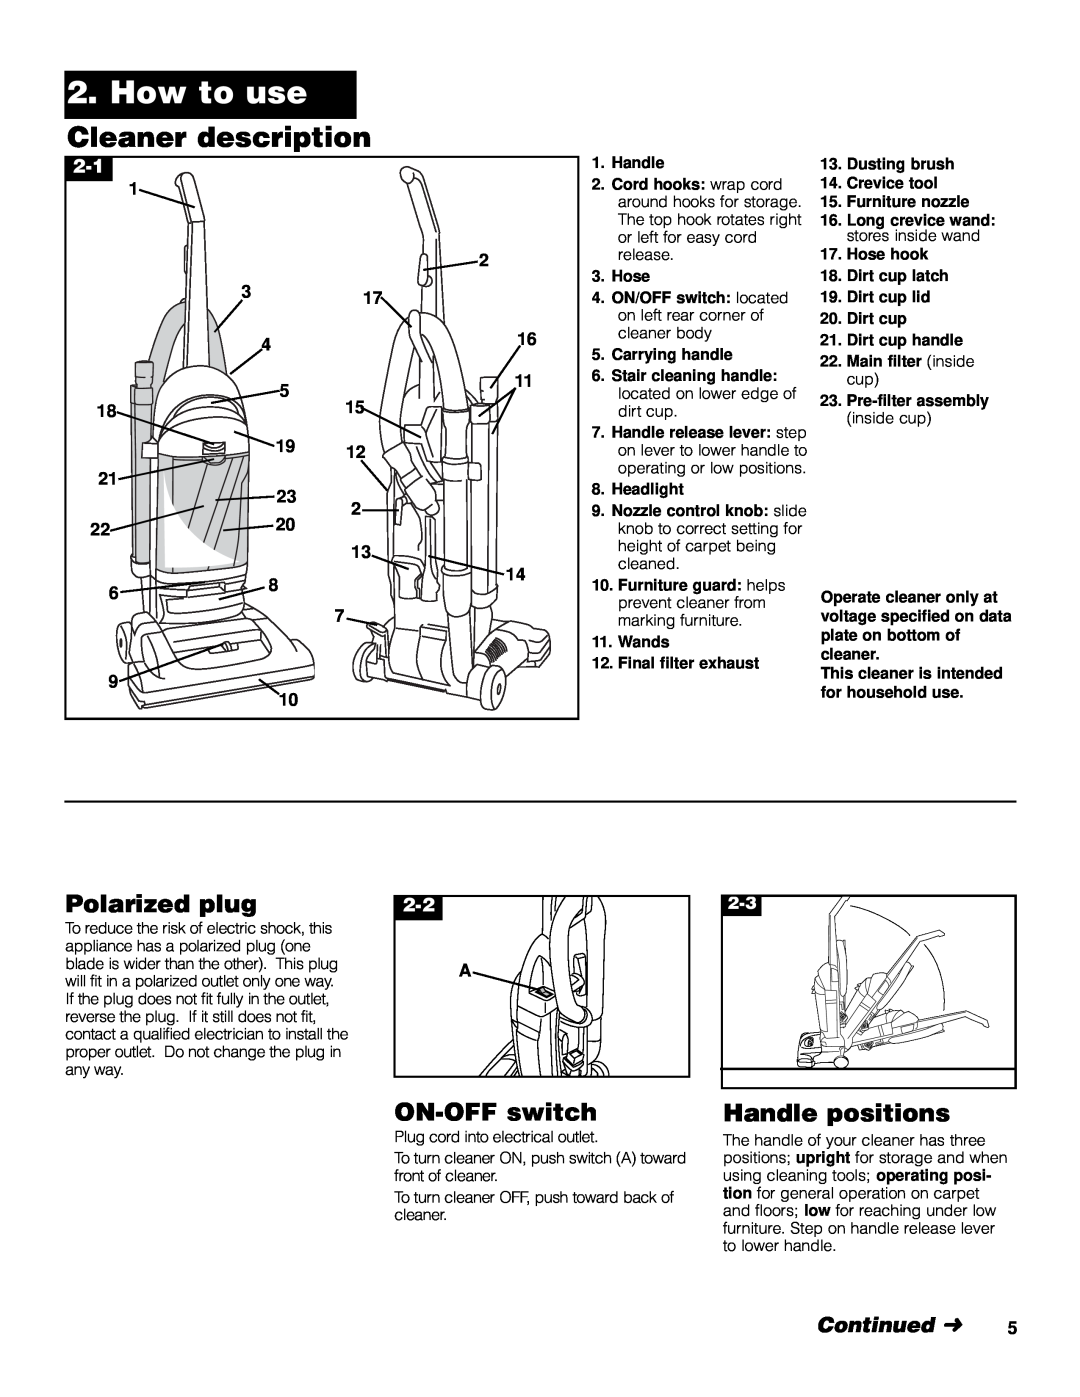 Hoover U5361950 owner manual How to use, Cleaner description, Polarized plug, ON-OFF switch, Handle positions, Continued 